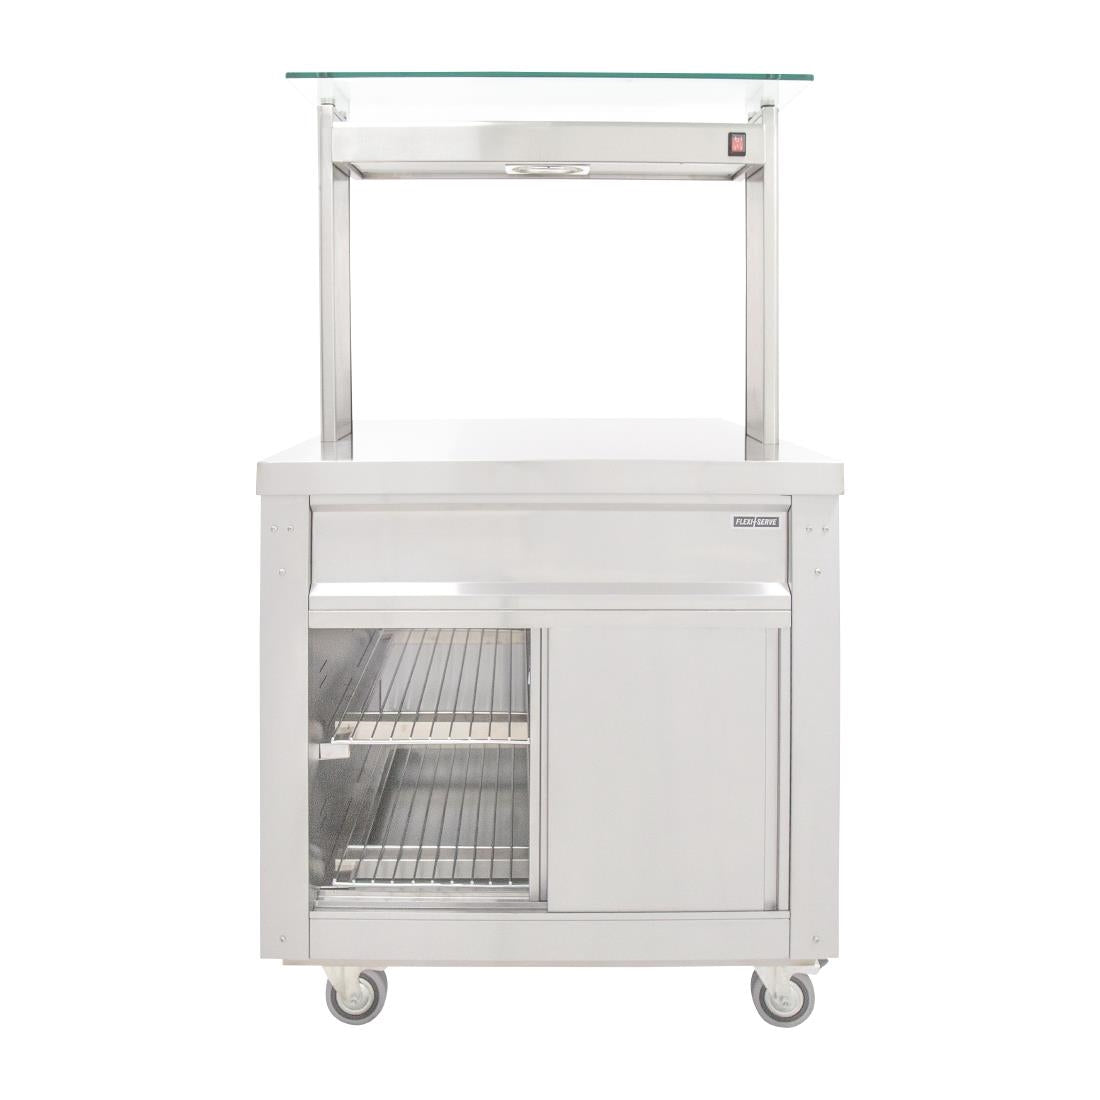 Parry Ambient Buffet Bar with Chilled Cupboard 860mm FS-A2PACK - FD230